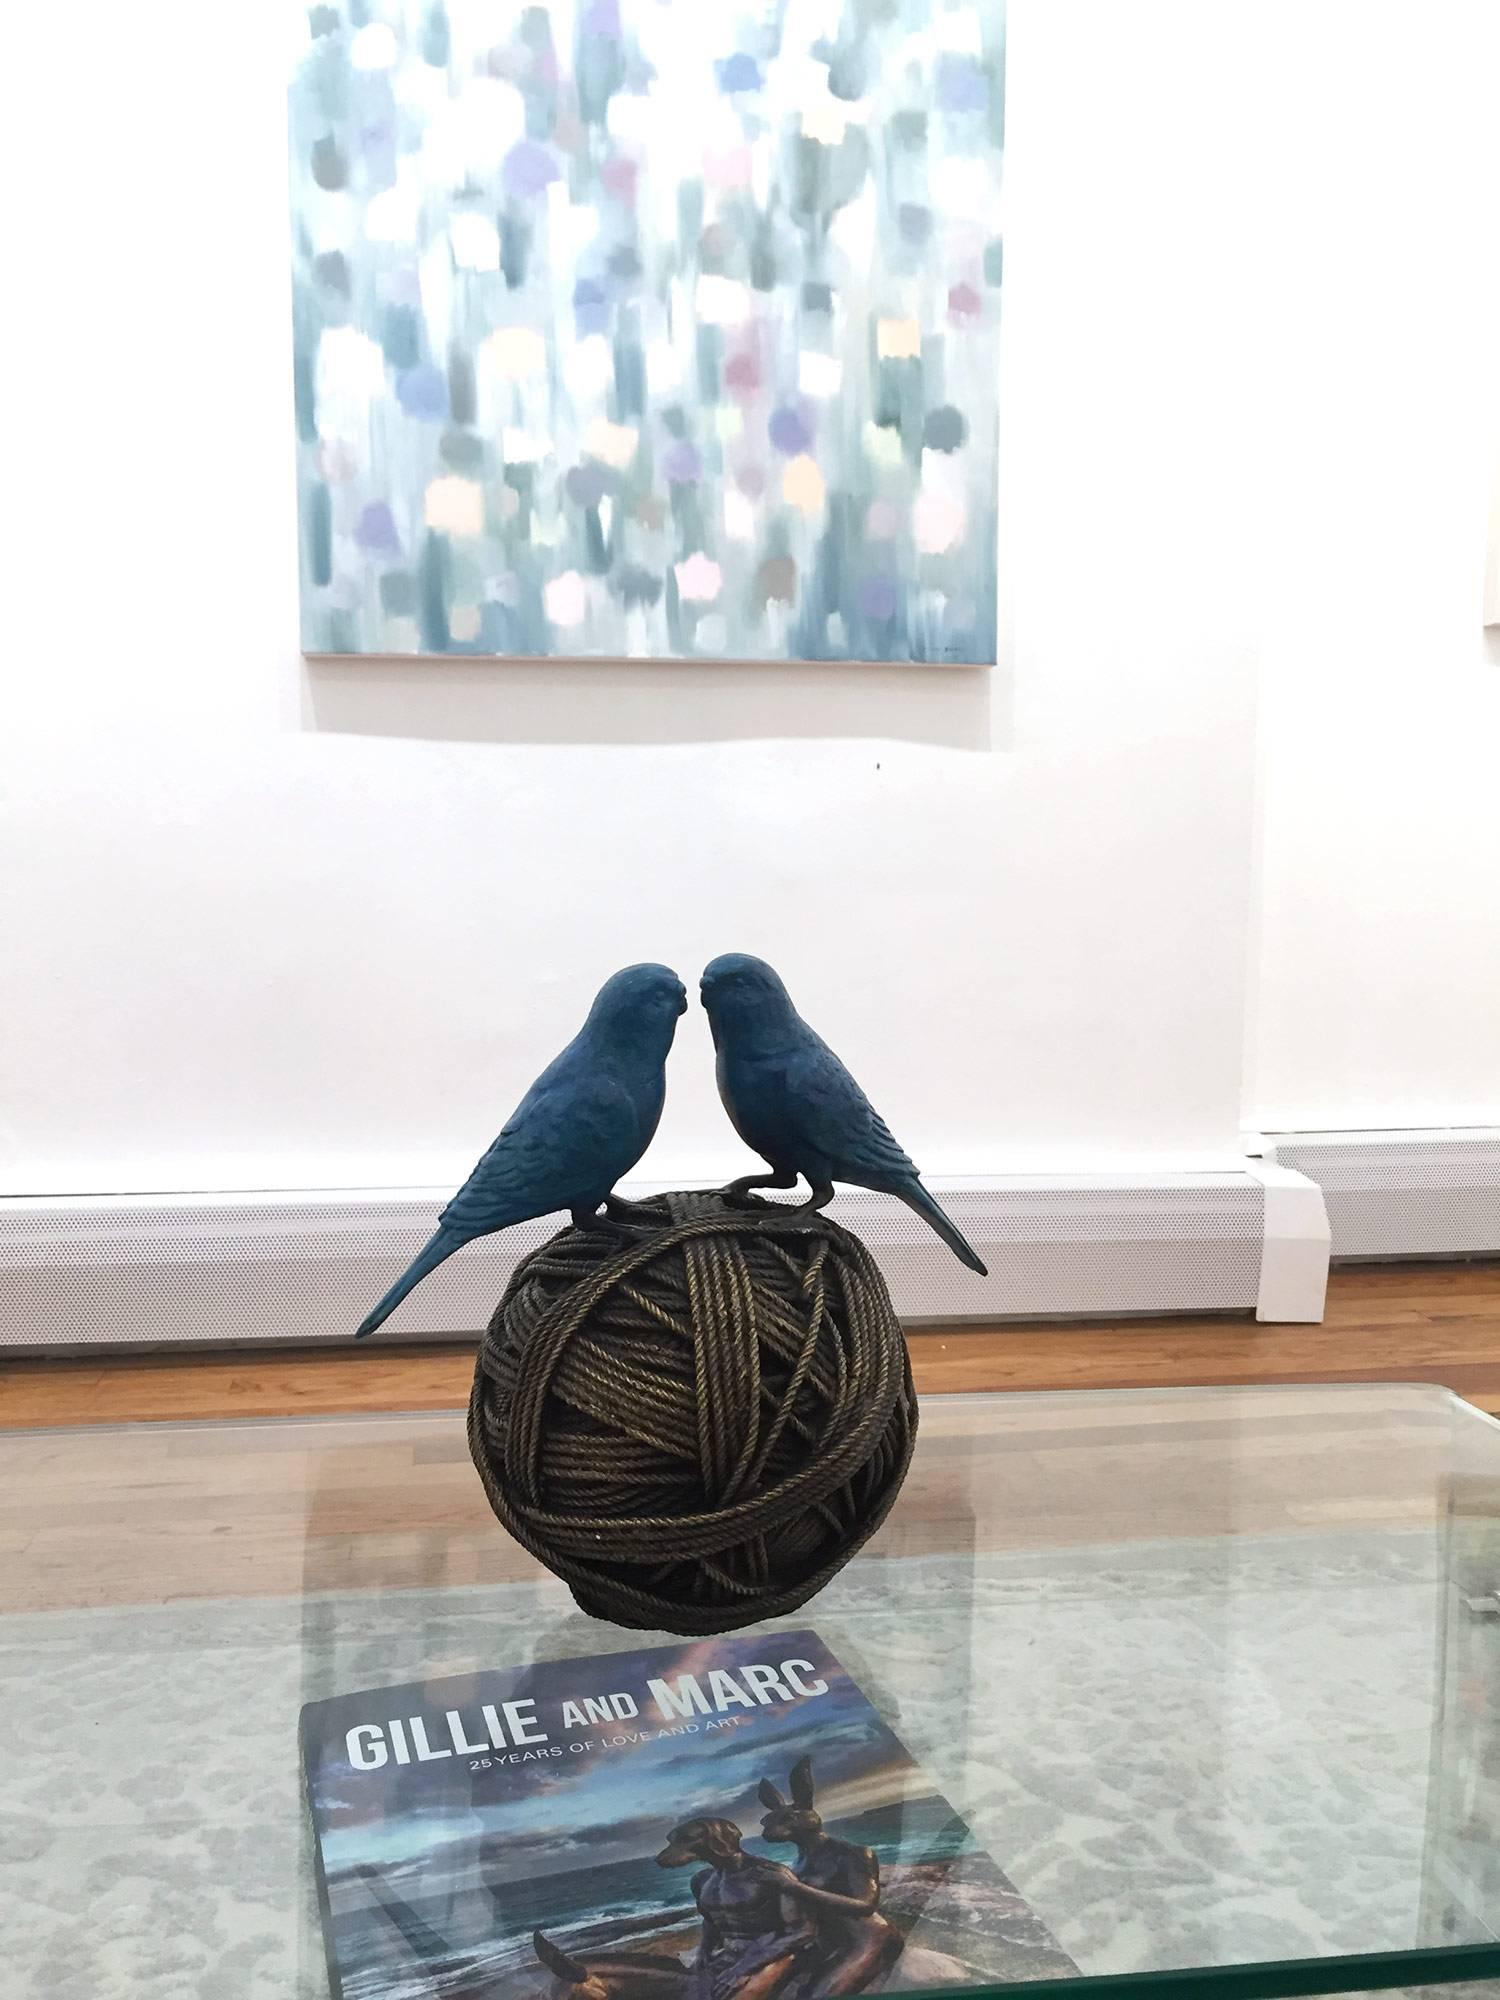 Life's a Ball (2 Budgies on ball) - Contemporary Sculpture by Gillie and Marc Schattner